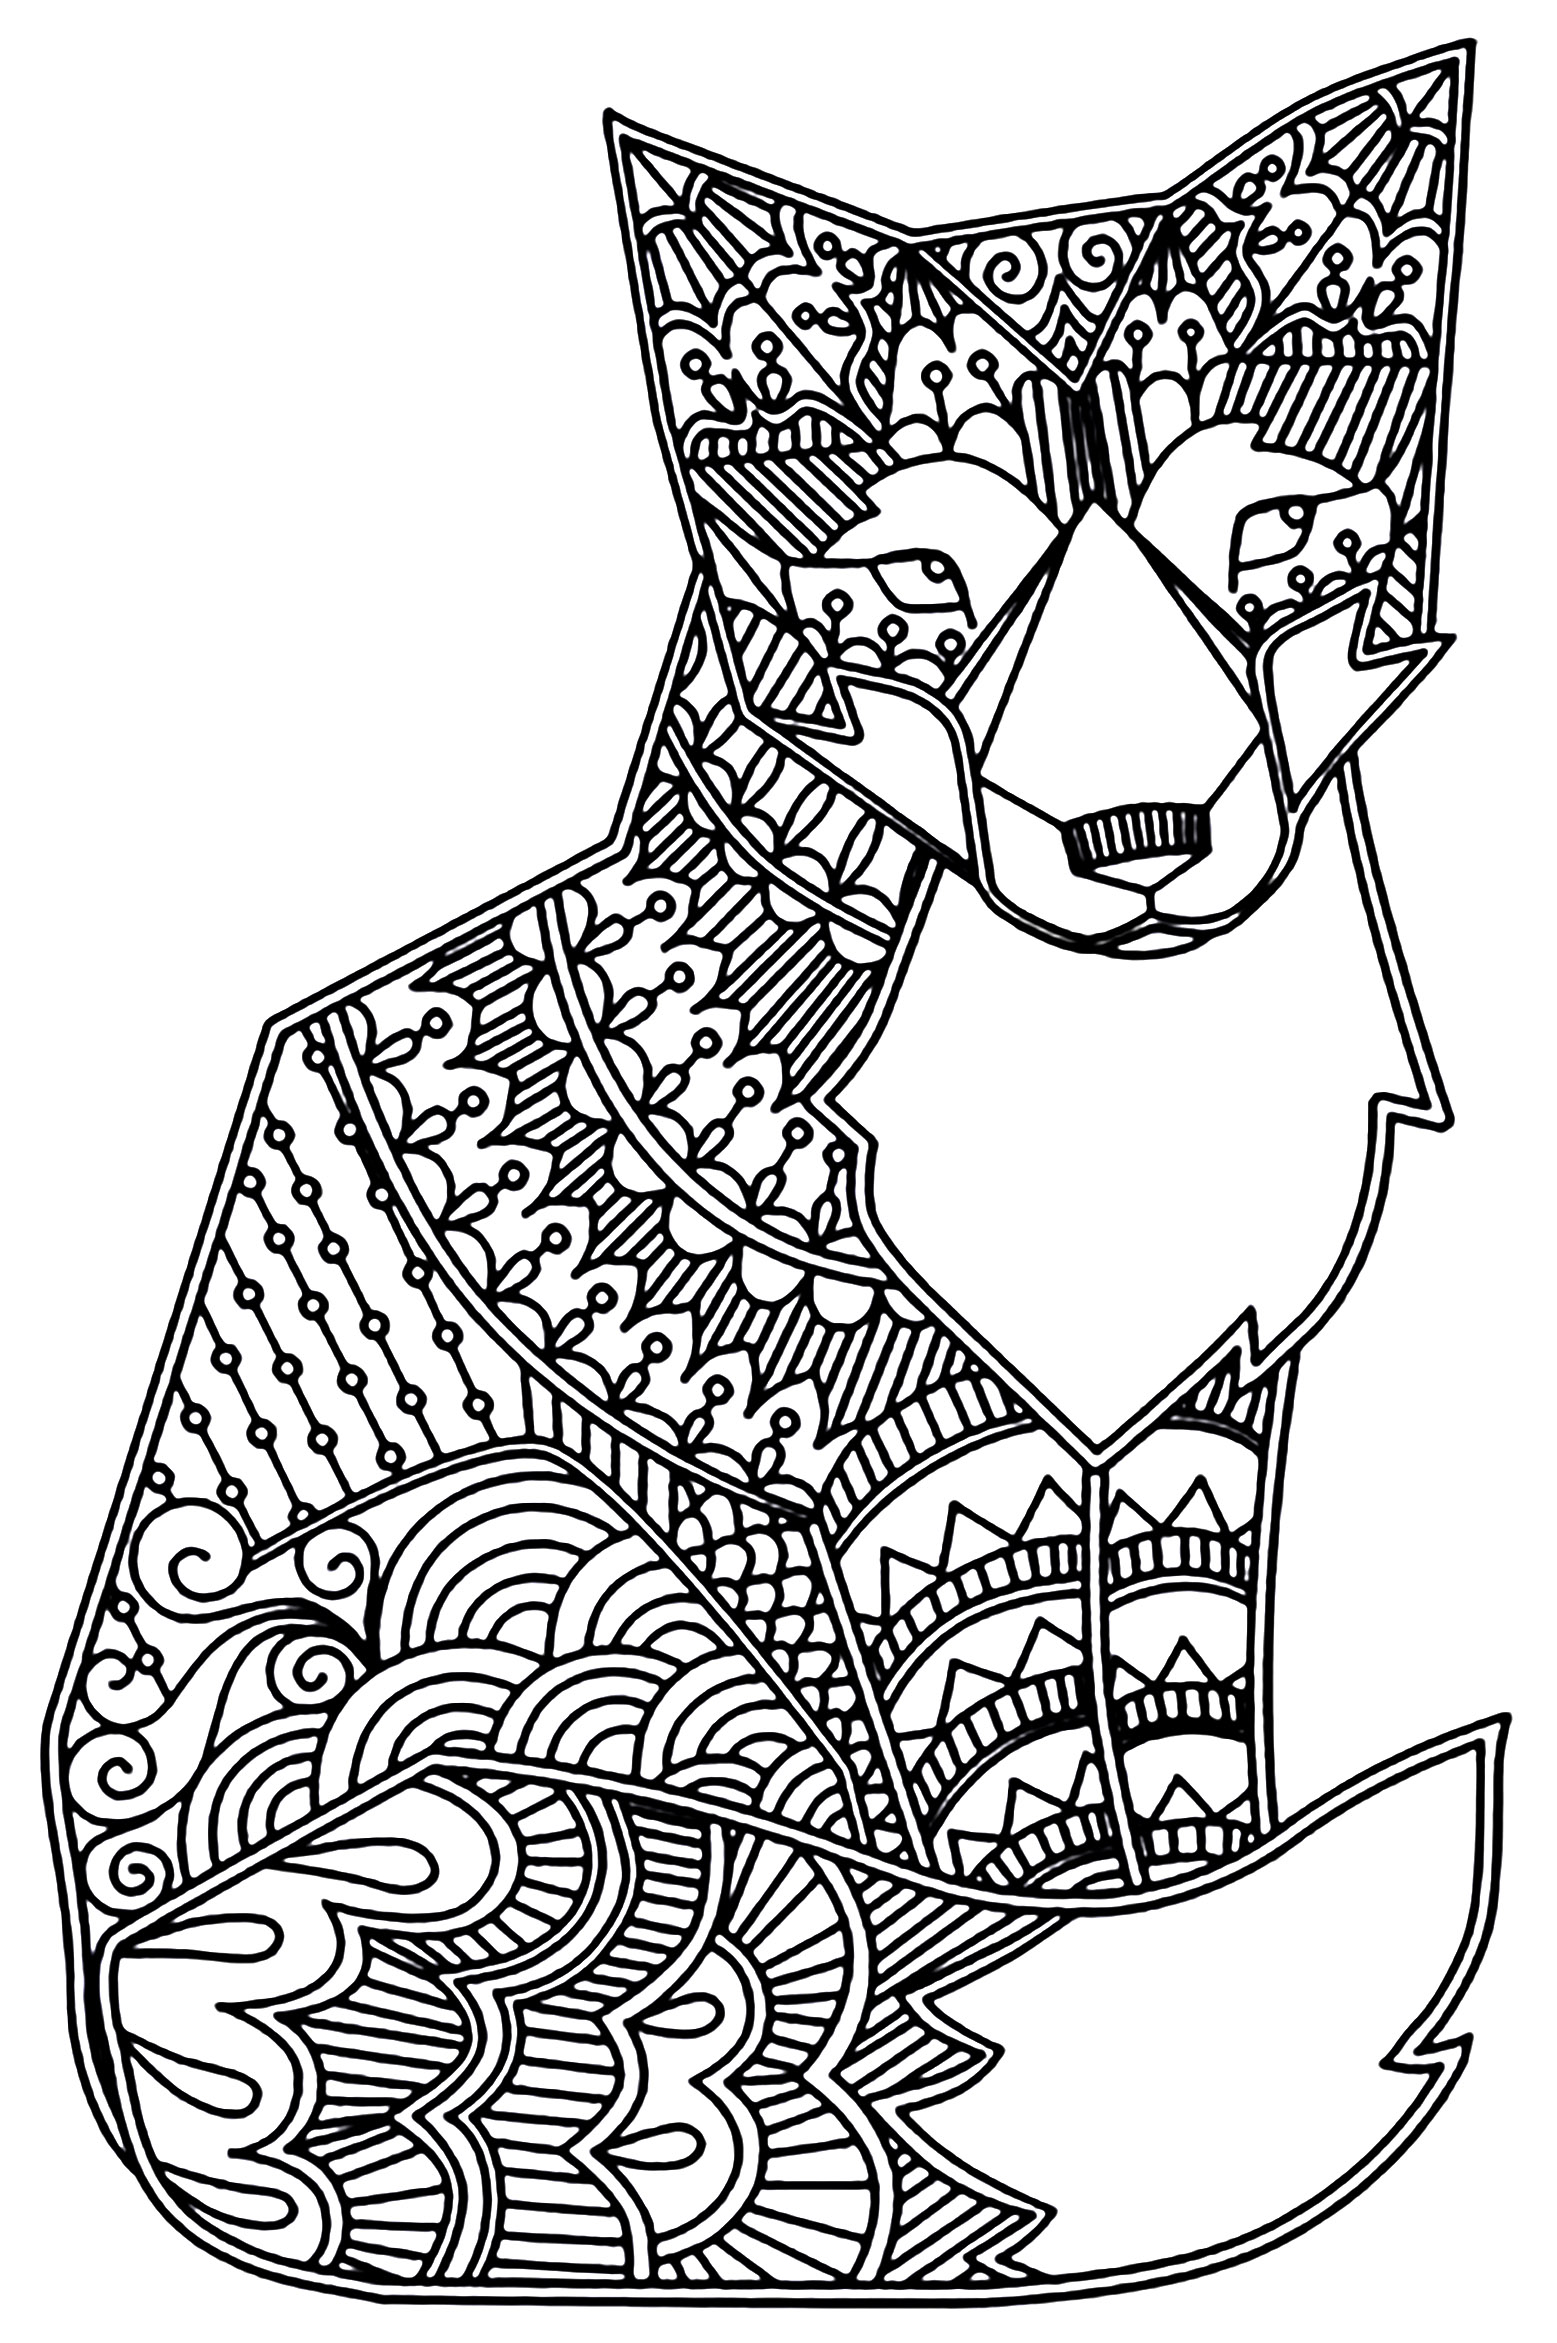 Download Mandala Fox Coloring Page - Free Printable Coloring Pages for Kids